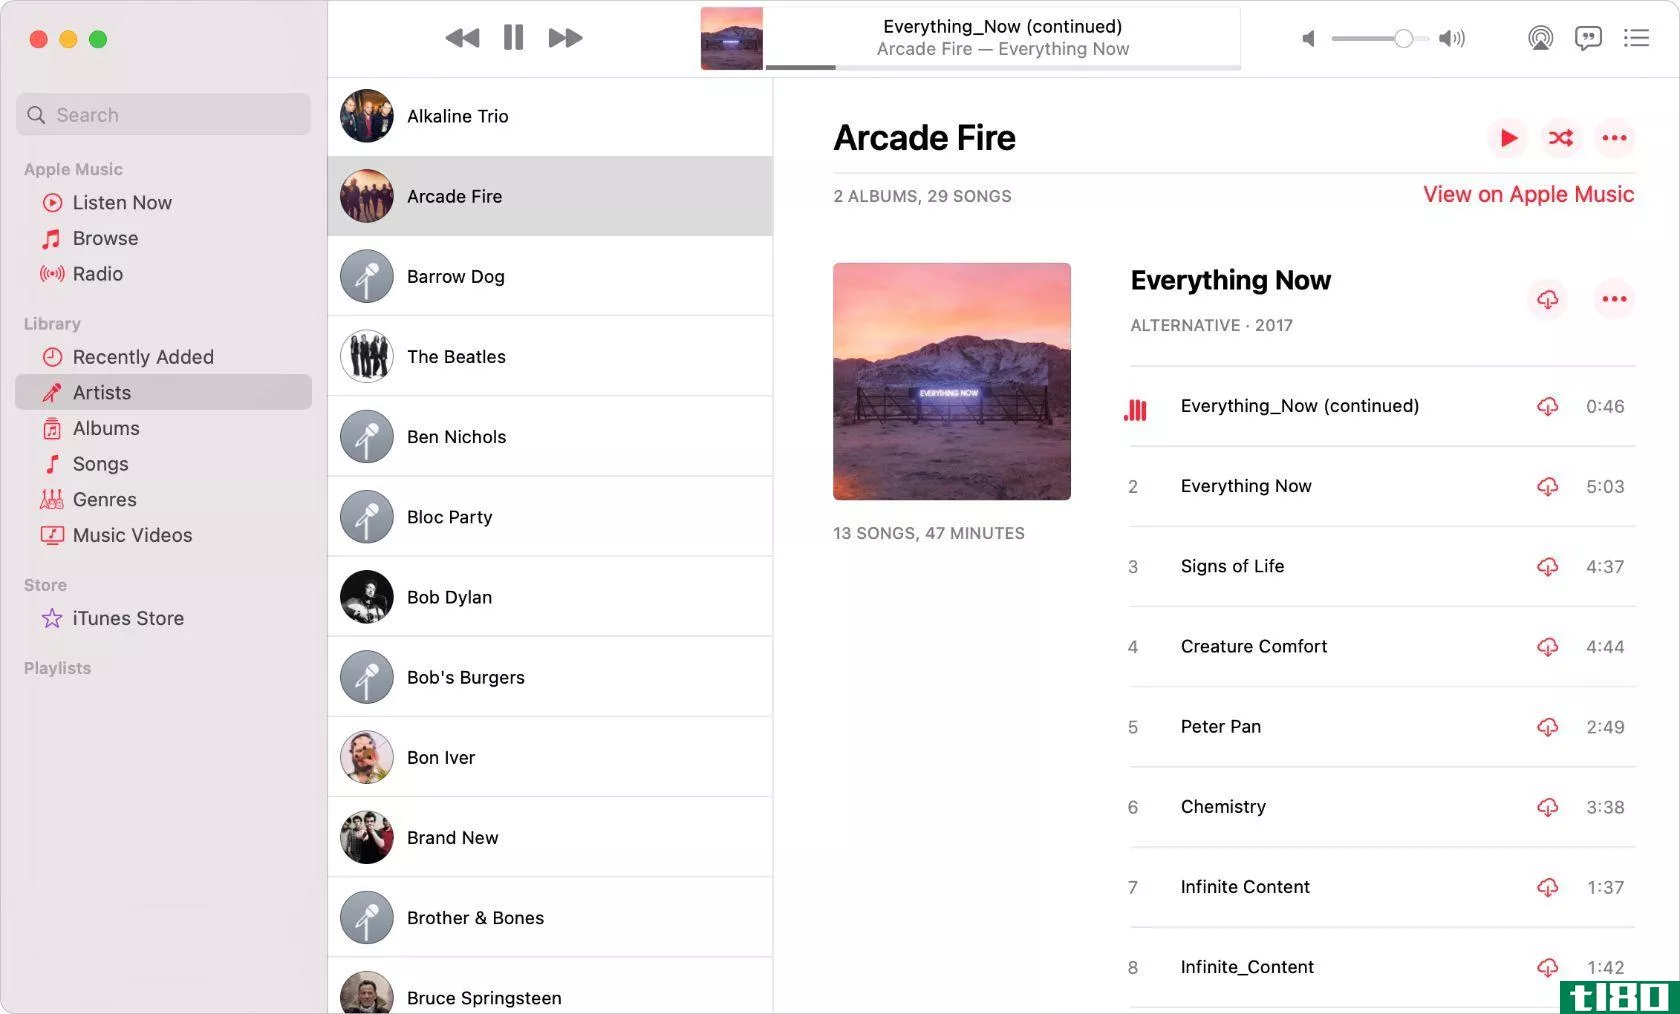 Apple Music artists page